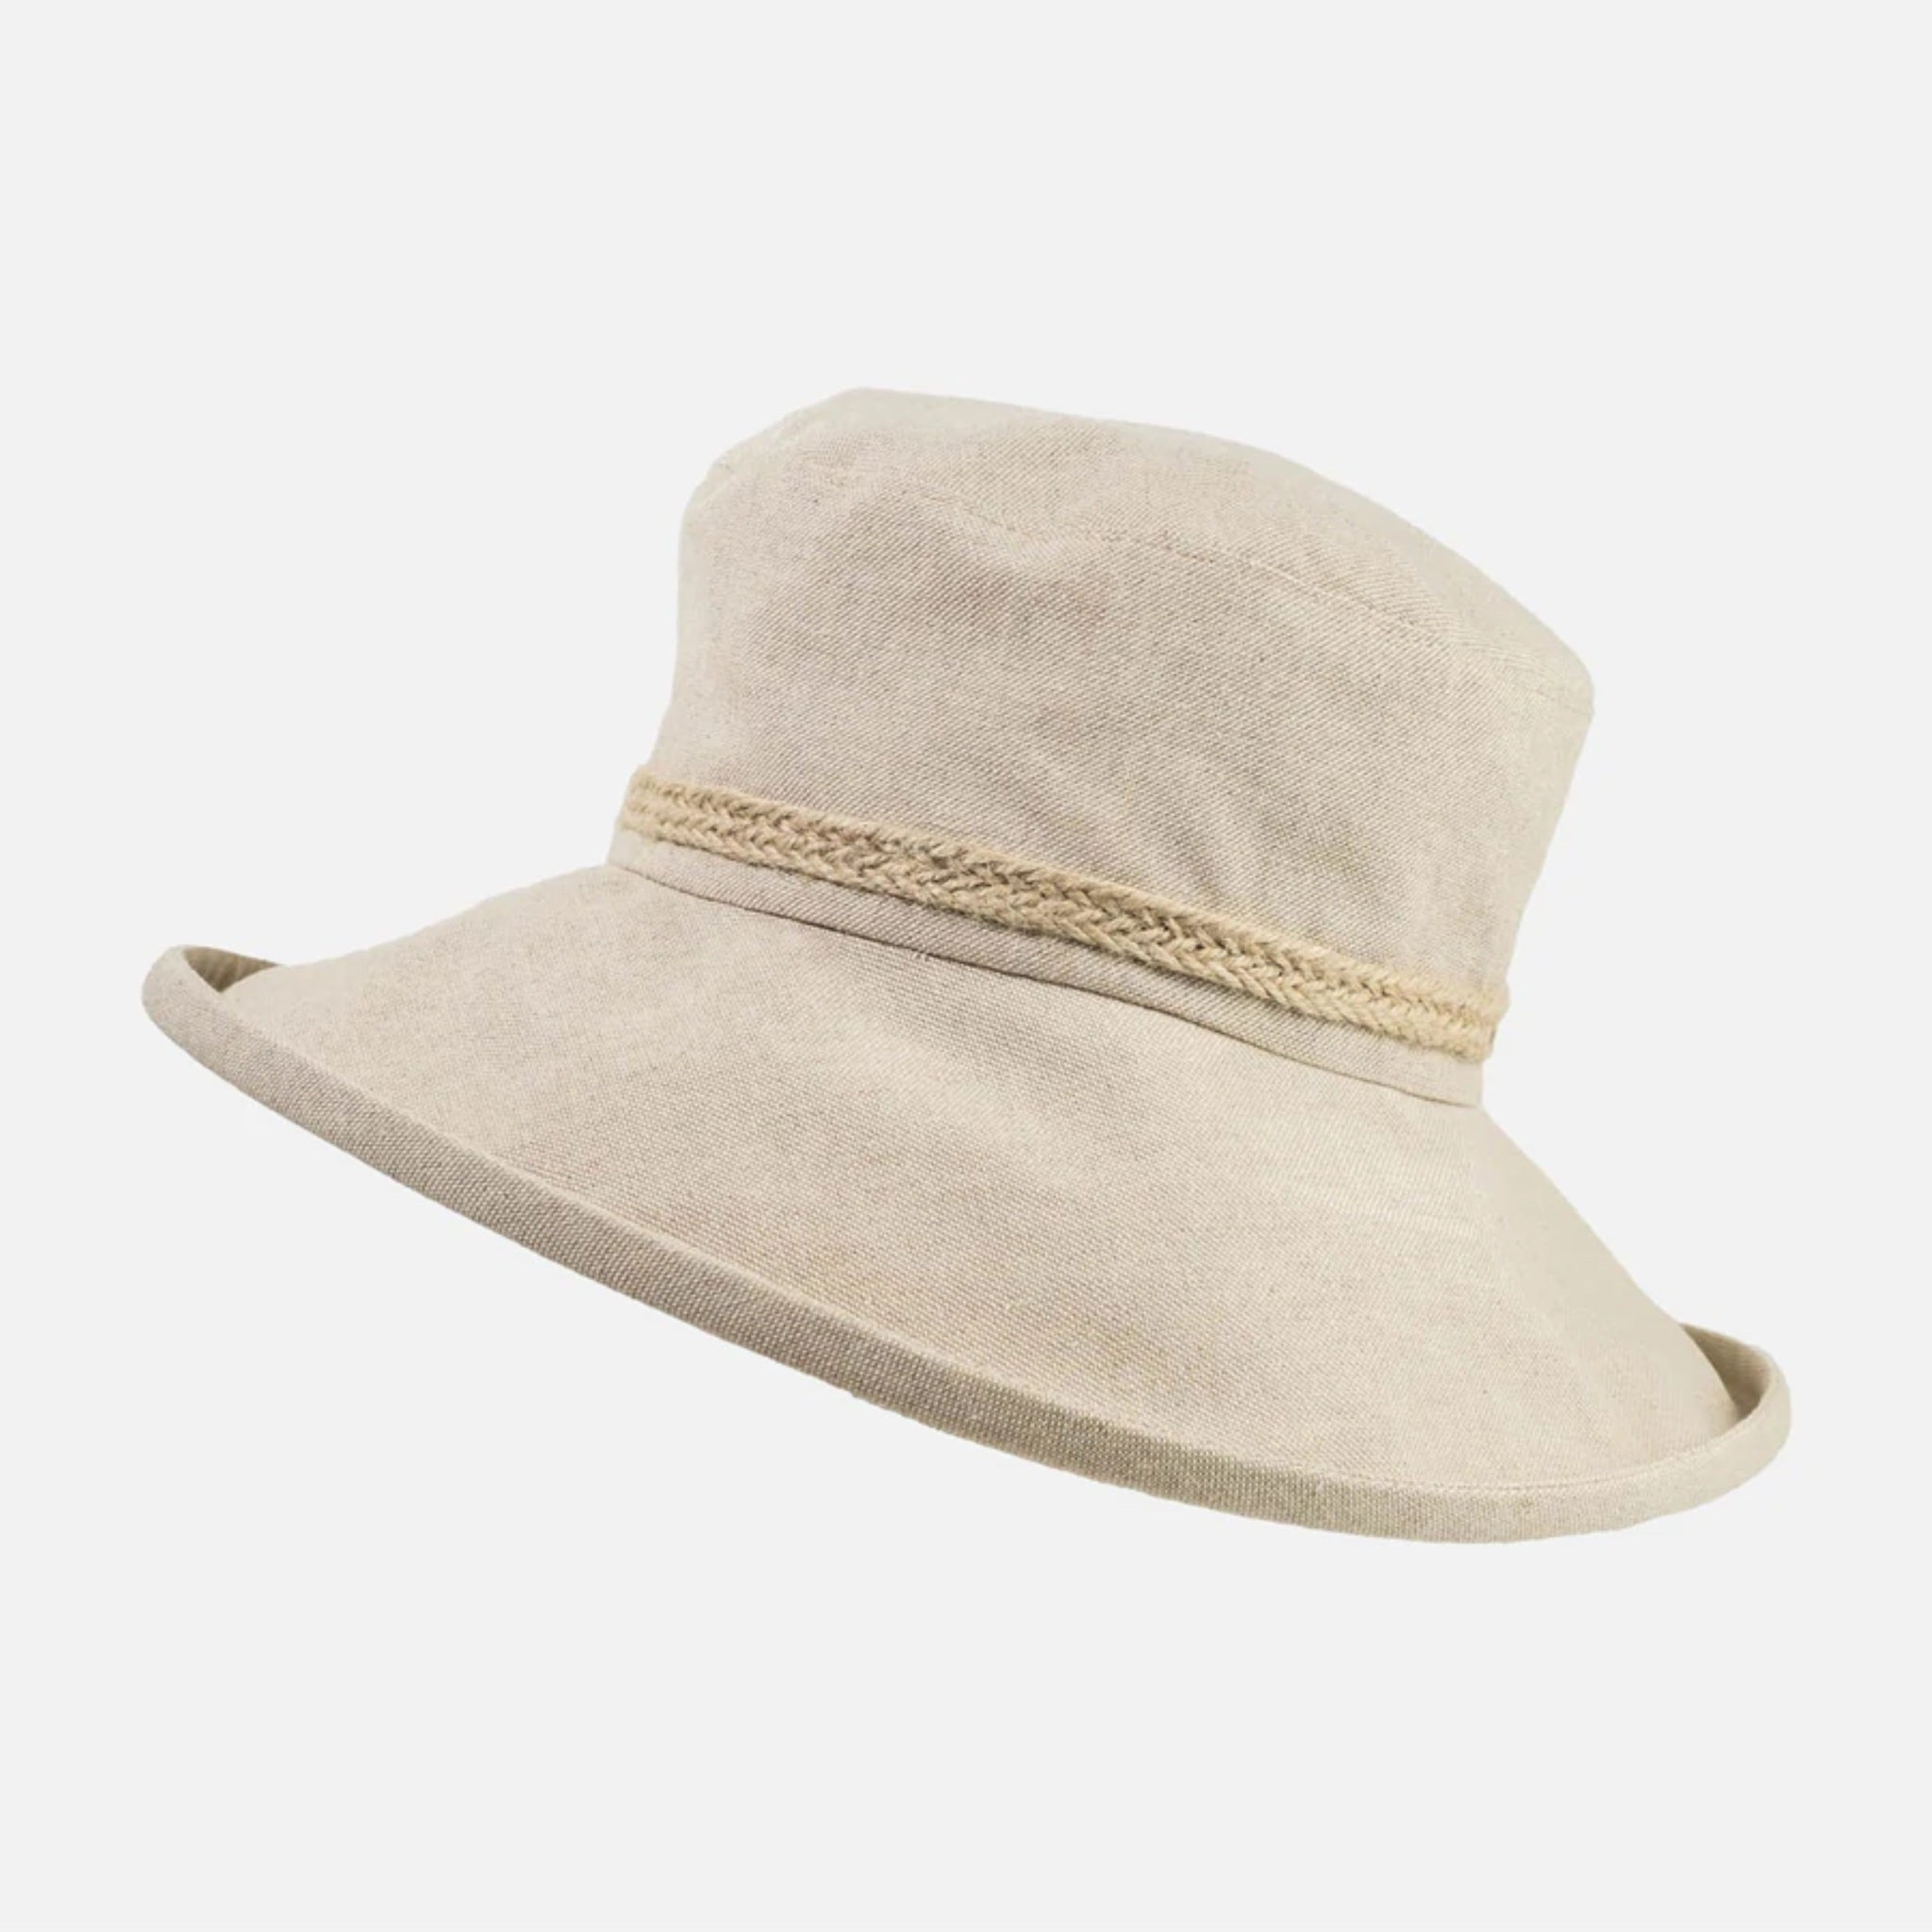 The Hat Shop Proppa Toppa Natural Linen Hat with Boned Brim and Hessian Band